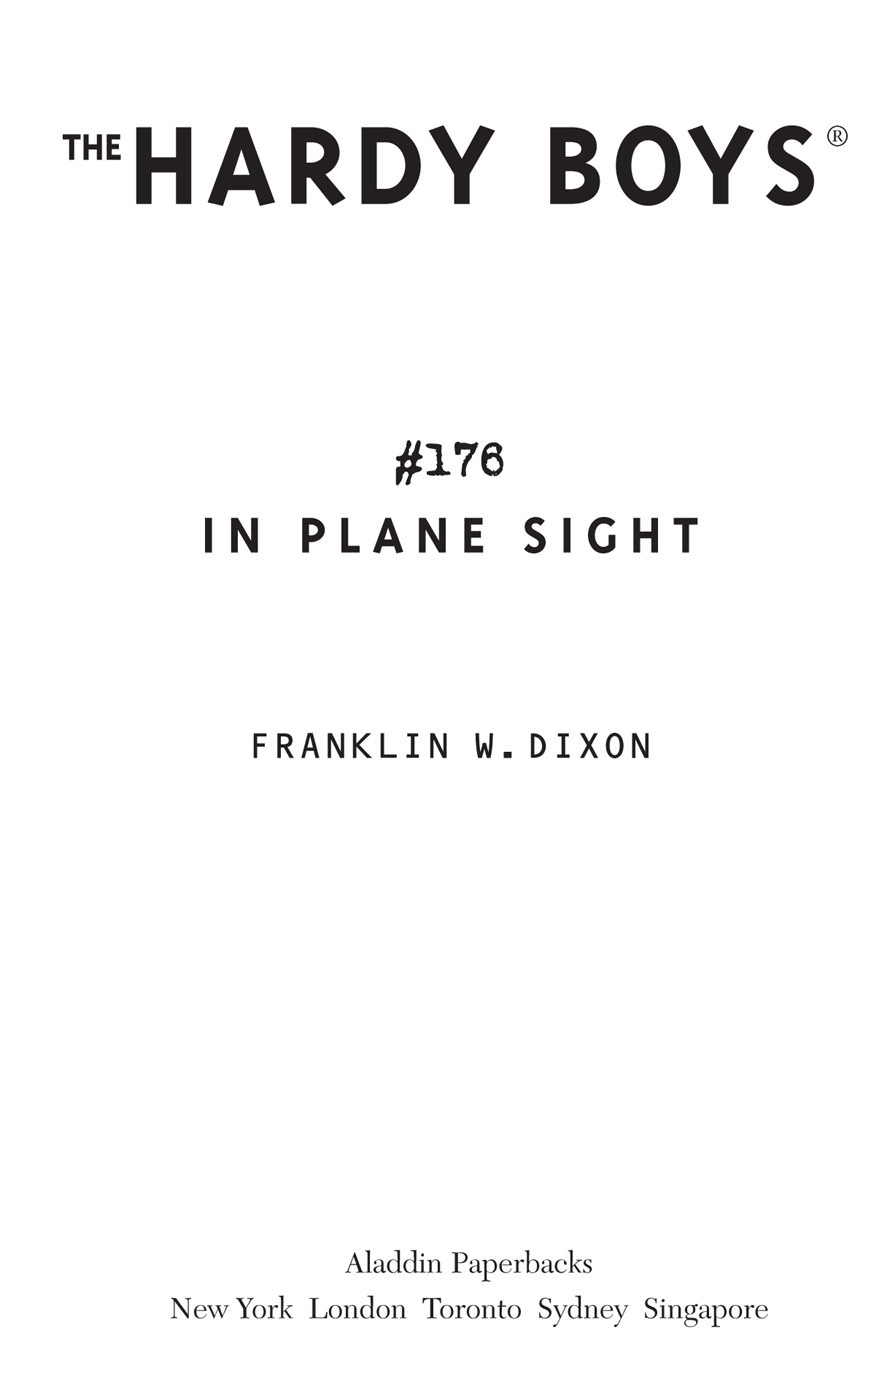 In Plane Sight